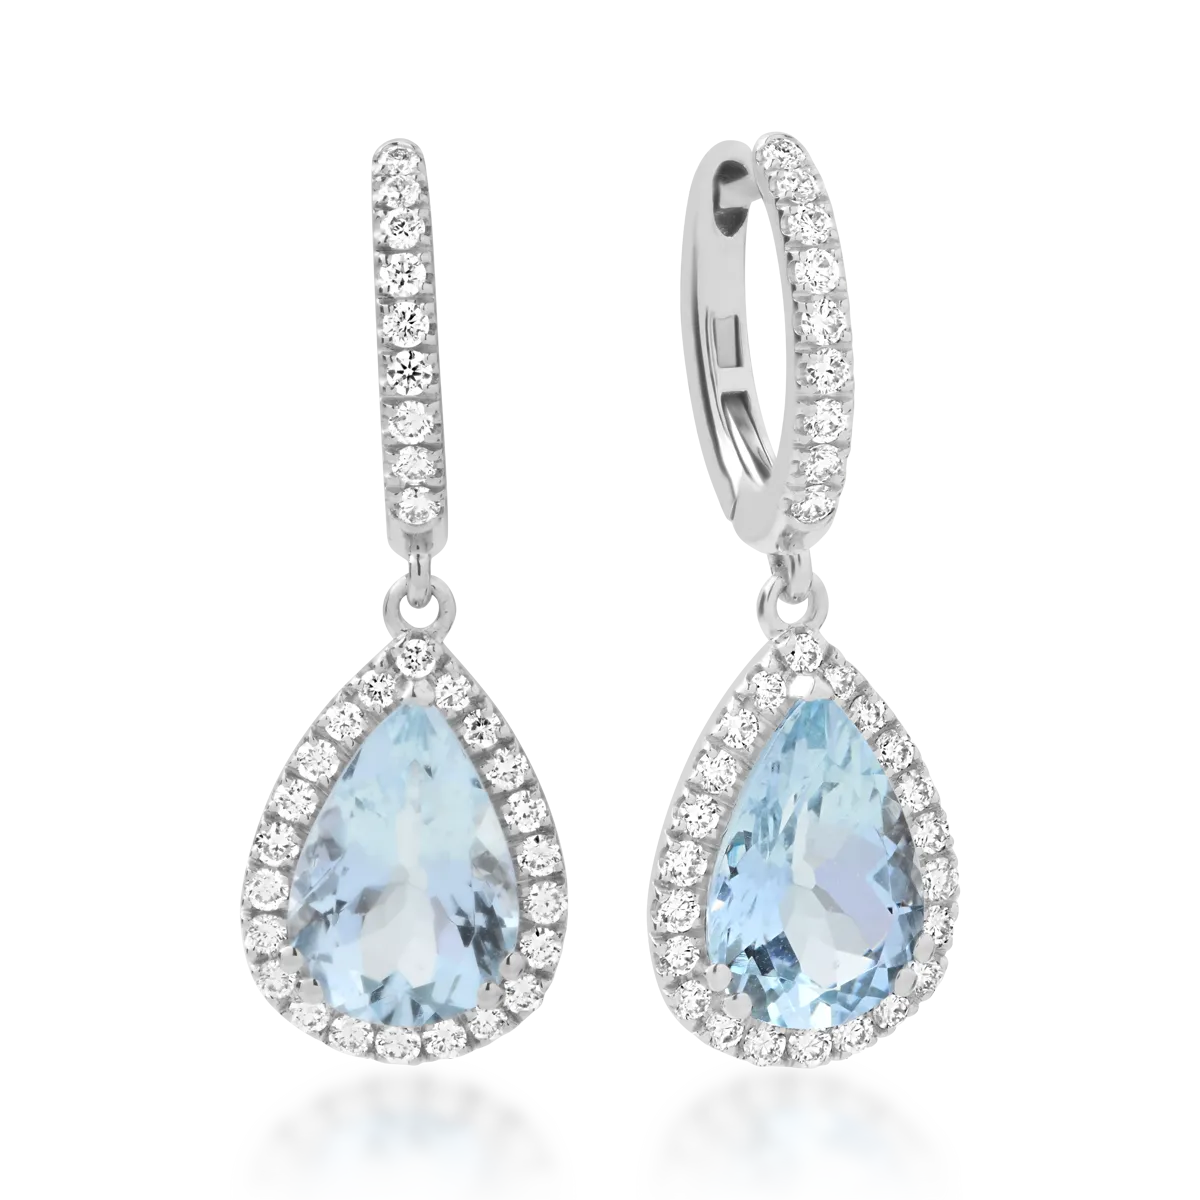 18K white gold earrings with 2.88ct aquamarines and 0.52ct diamonds